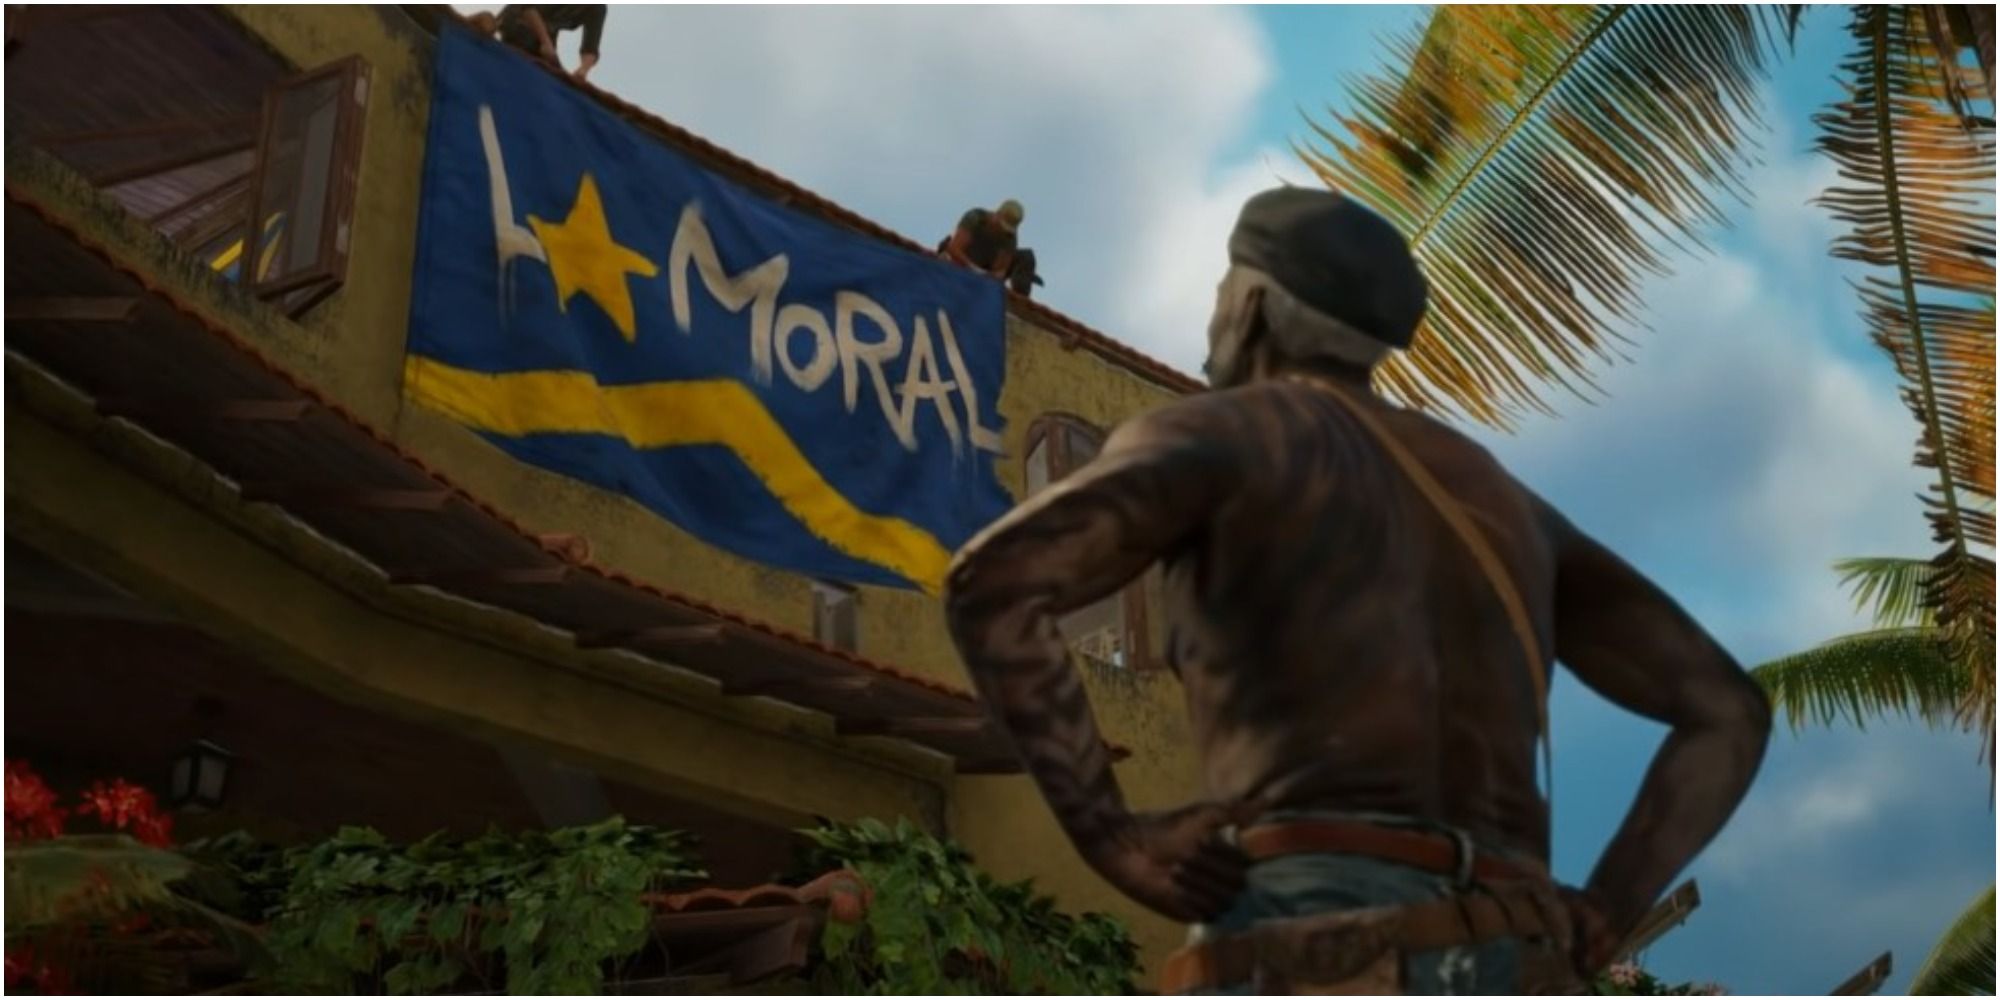 Far Cry 6 La Moral Hanging Up A Banner With El Tigre Cheering Them On